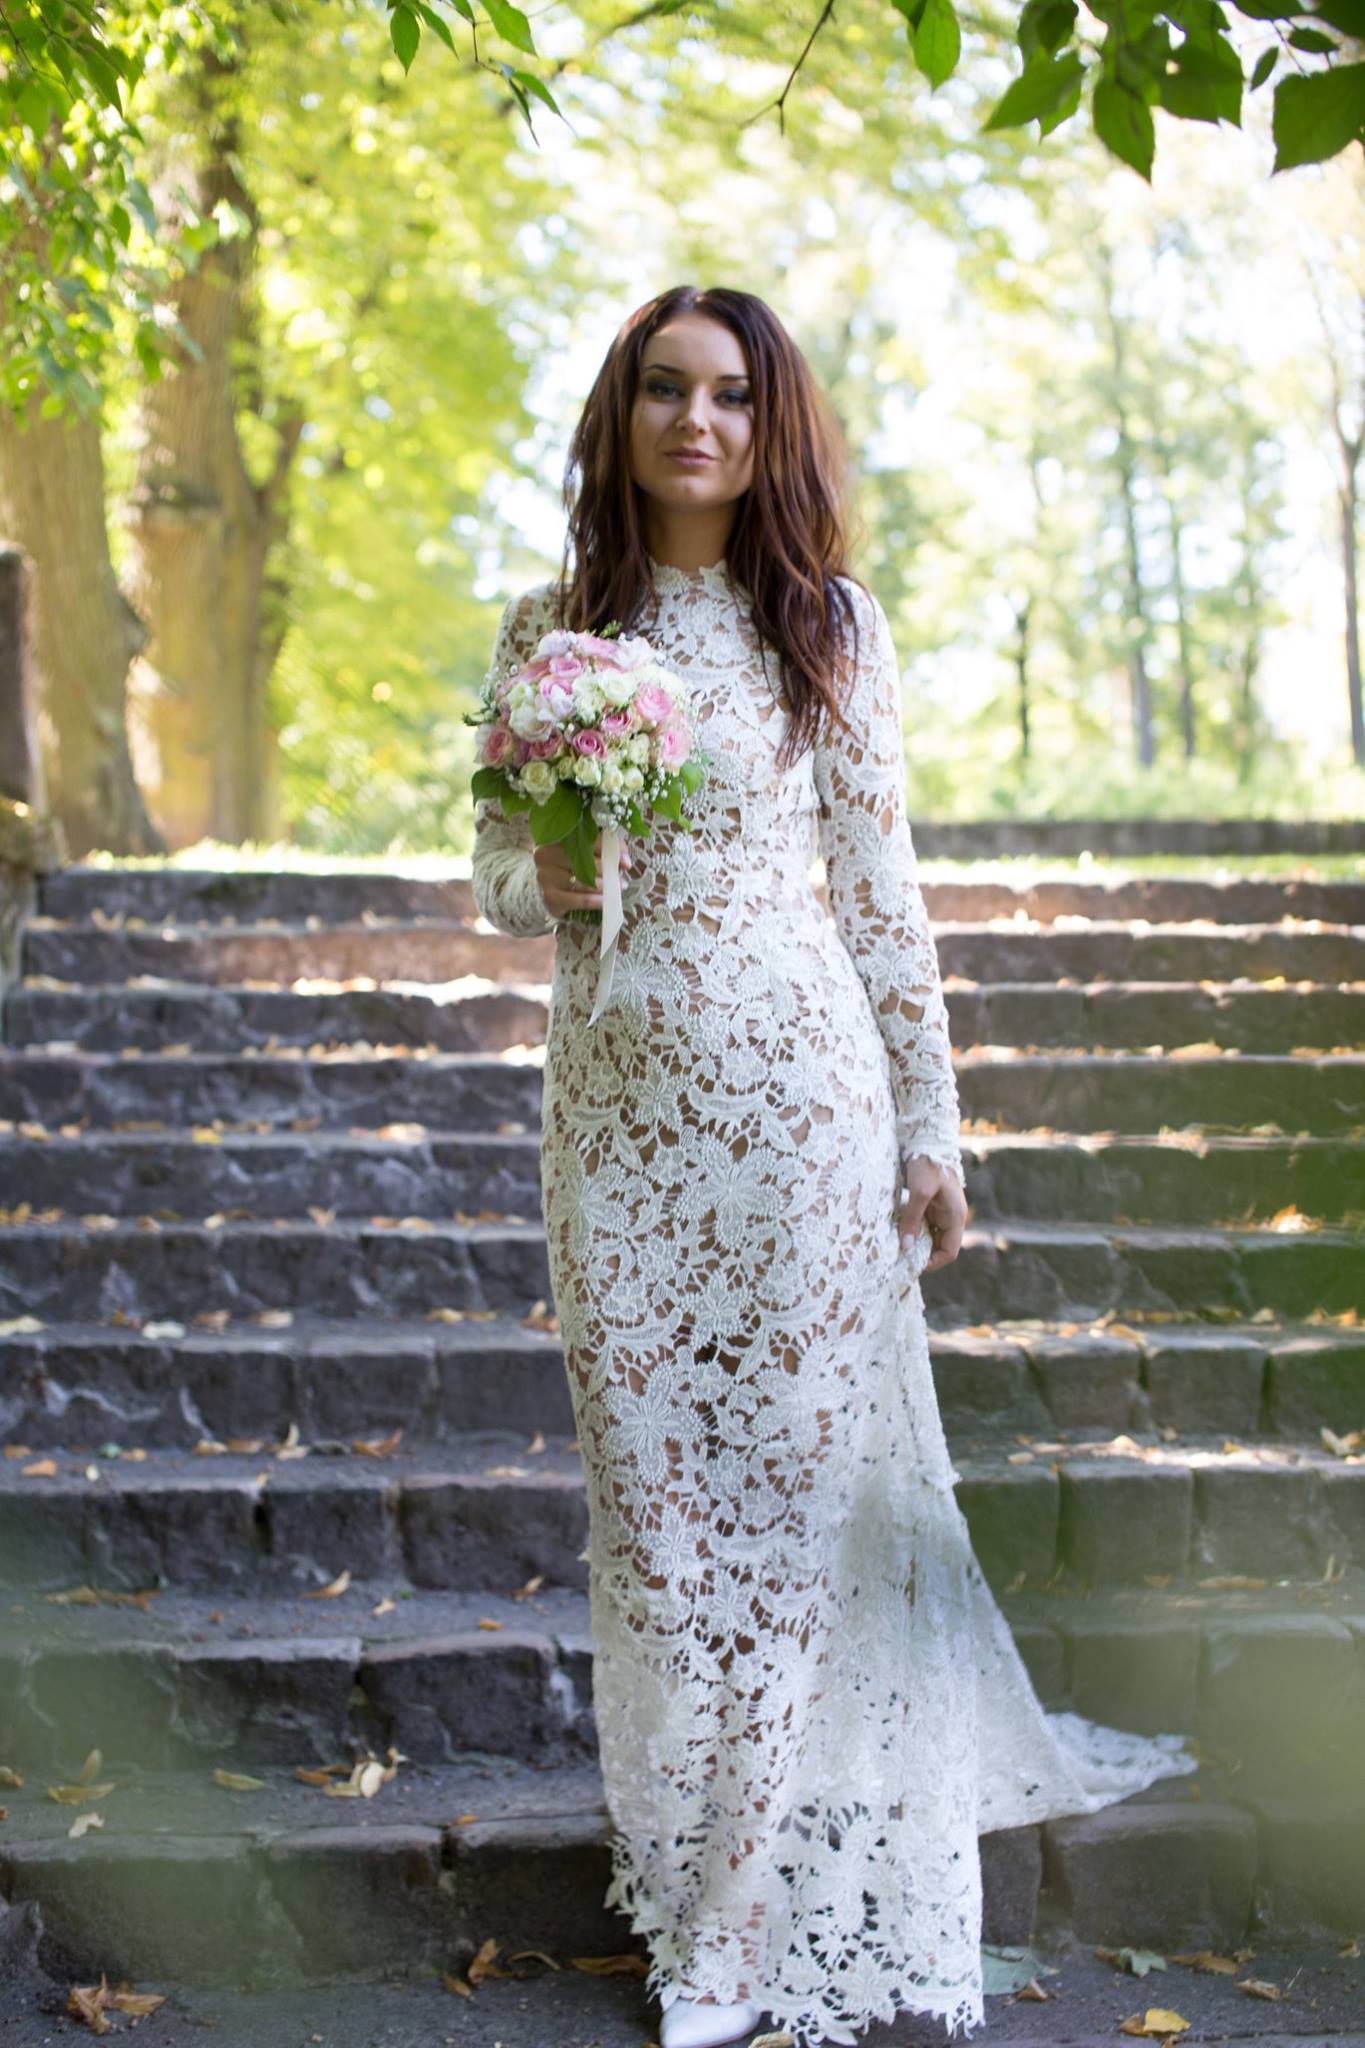 lady on her wedding day in lace wedding dress, long-sleeved